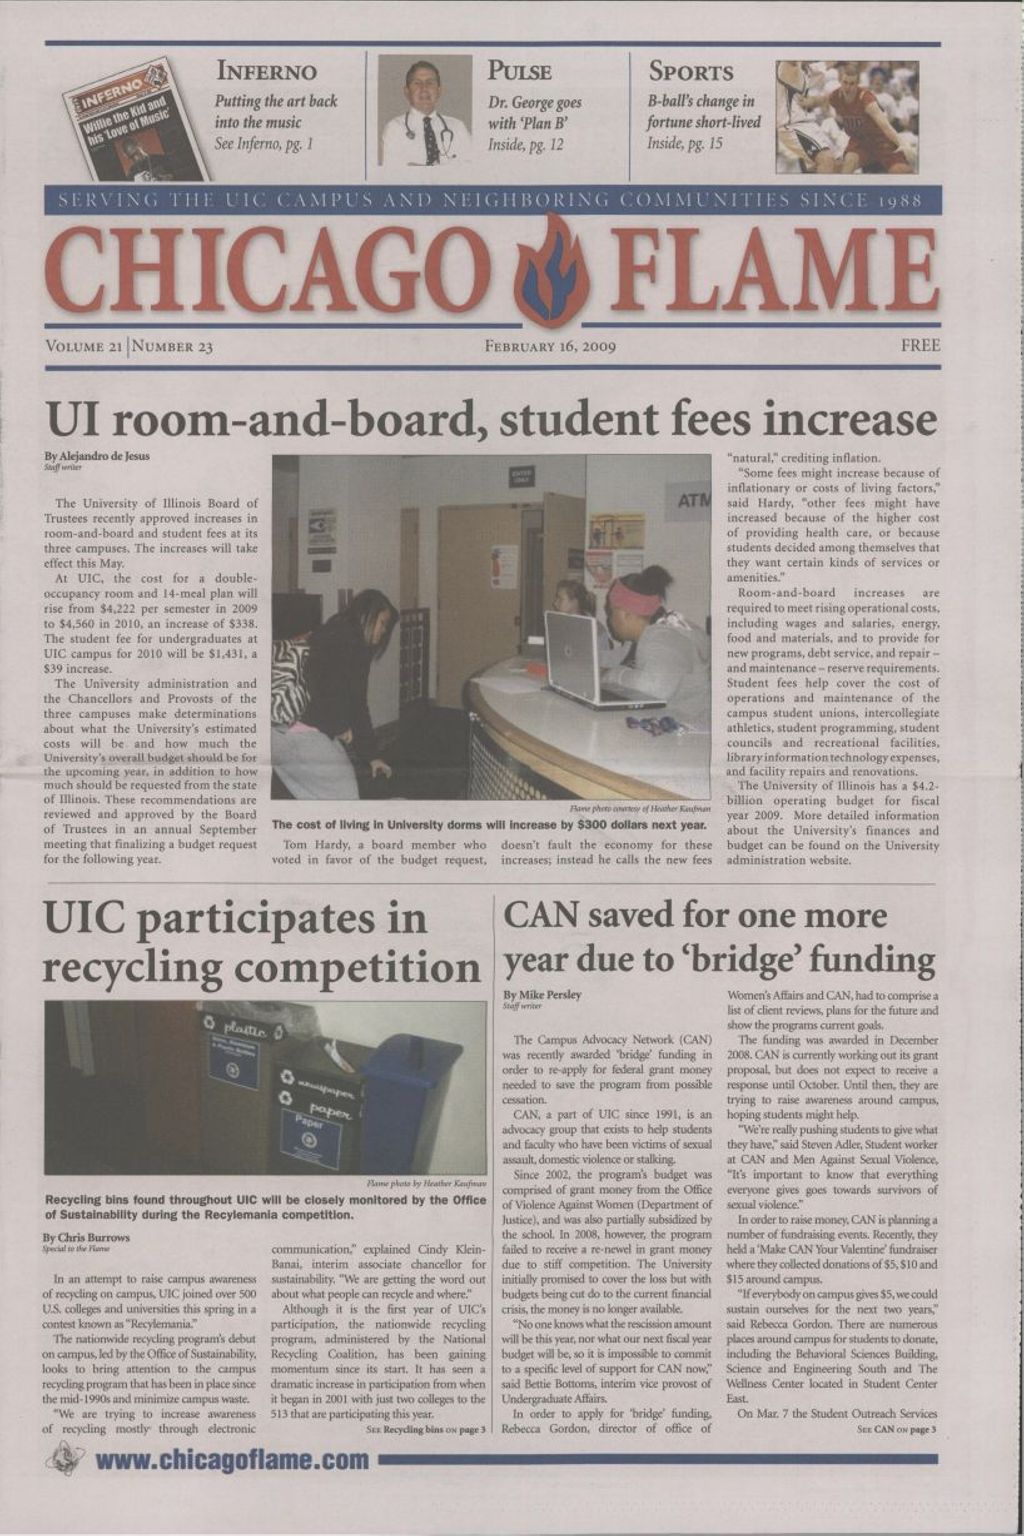 Miniature of Chicago Flame (February 16, 2009)